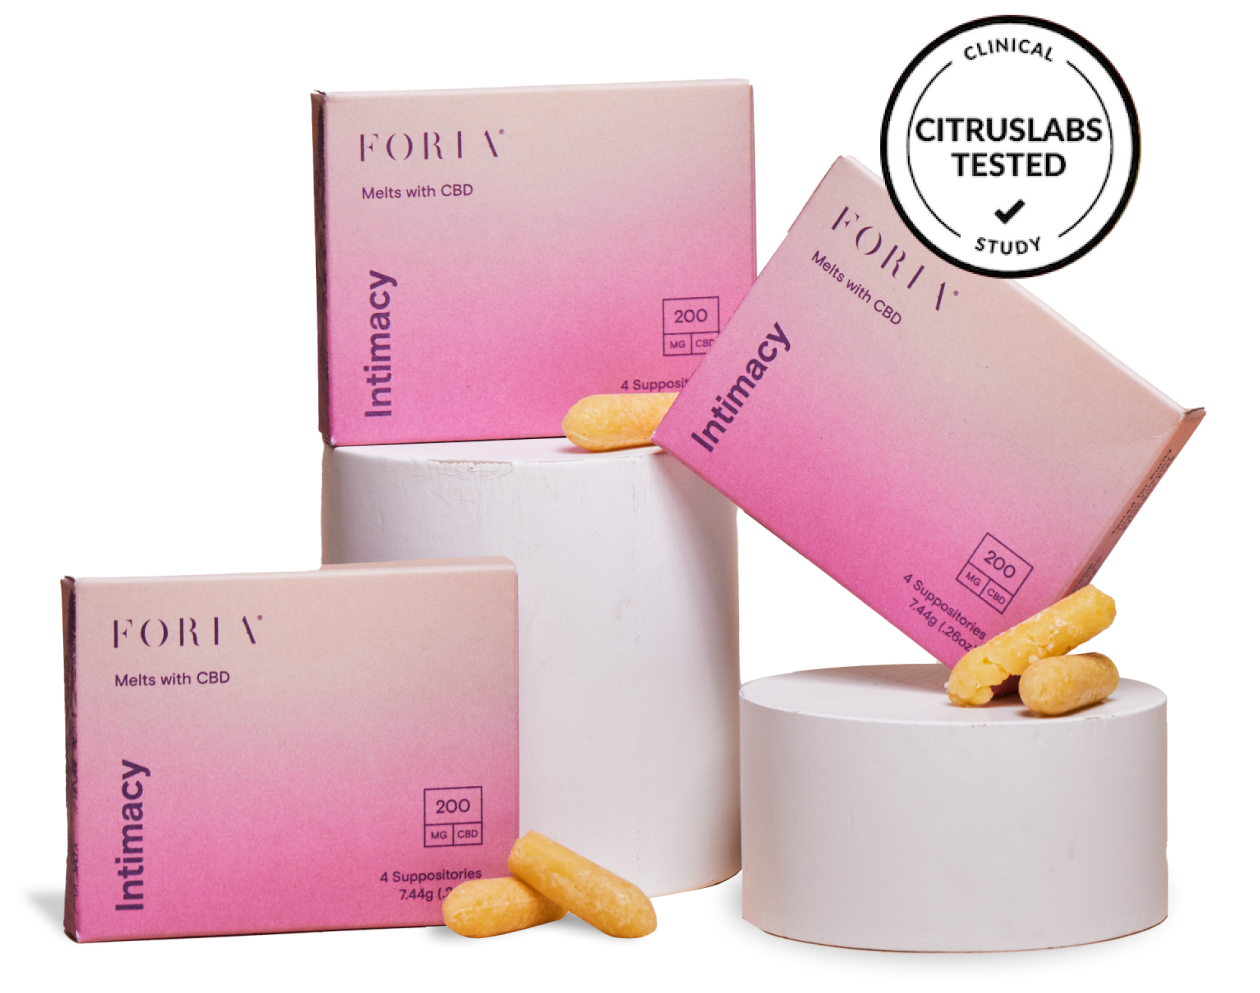 Three boxes of Foria Intimacy Melts with pink packaging design, two of them on short cylinder display pillars, and loose melts resting against one of the boxes, plus a “Citruslabs Tested Clinical Study” badge to indicate the product’s quality and efficacy.